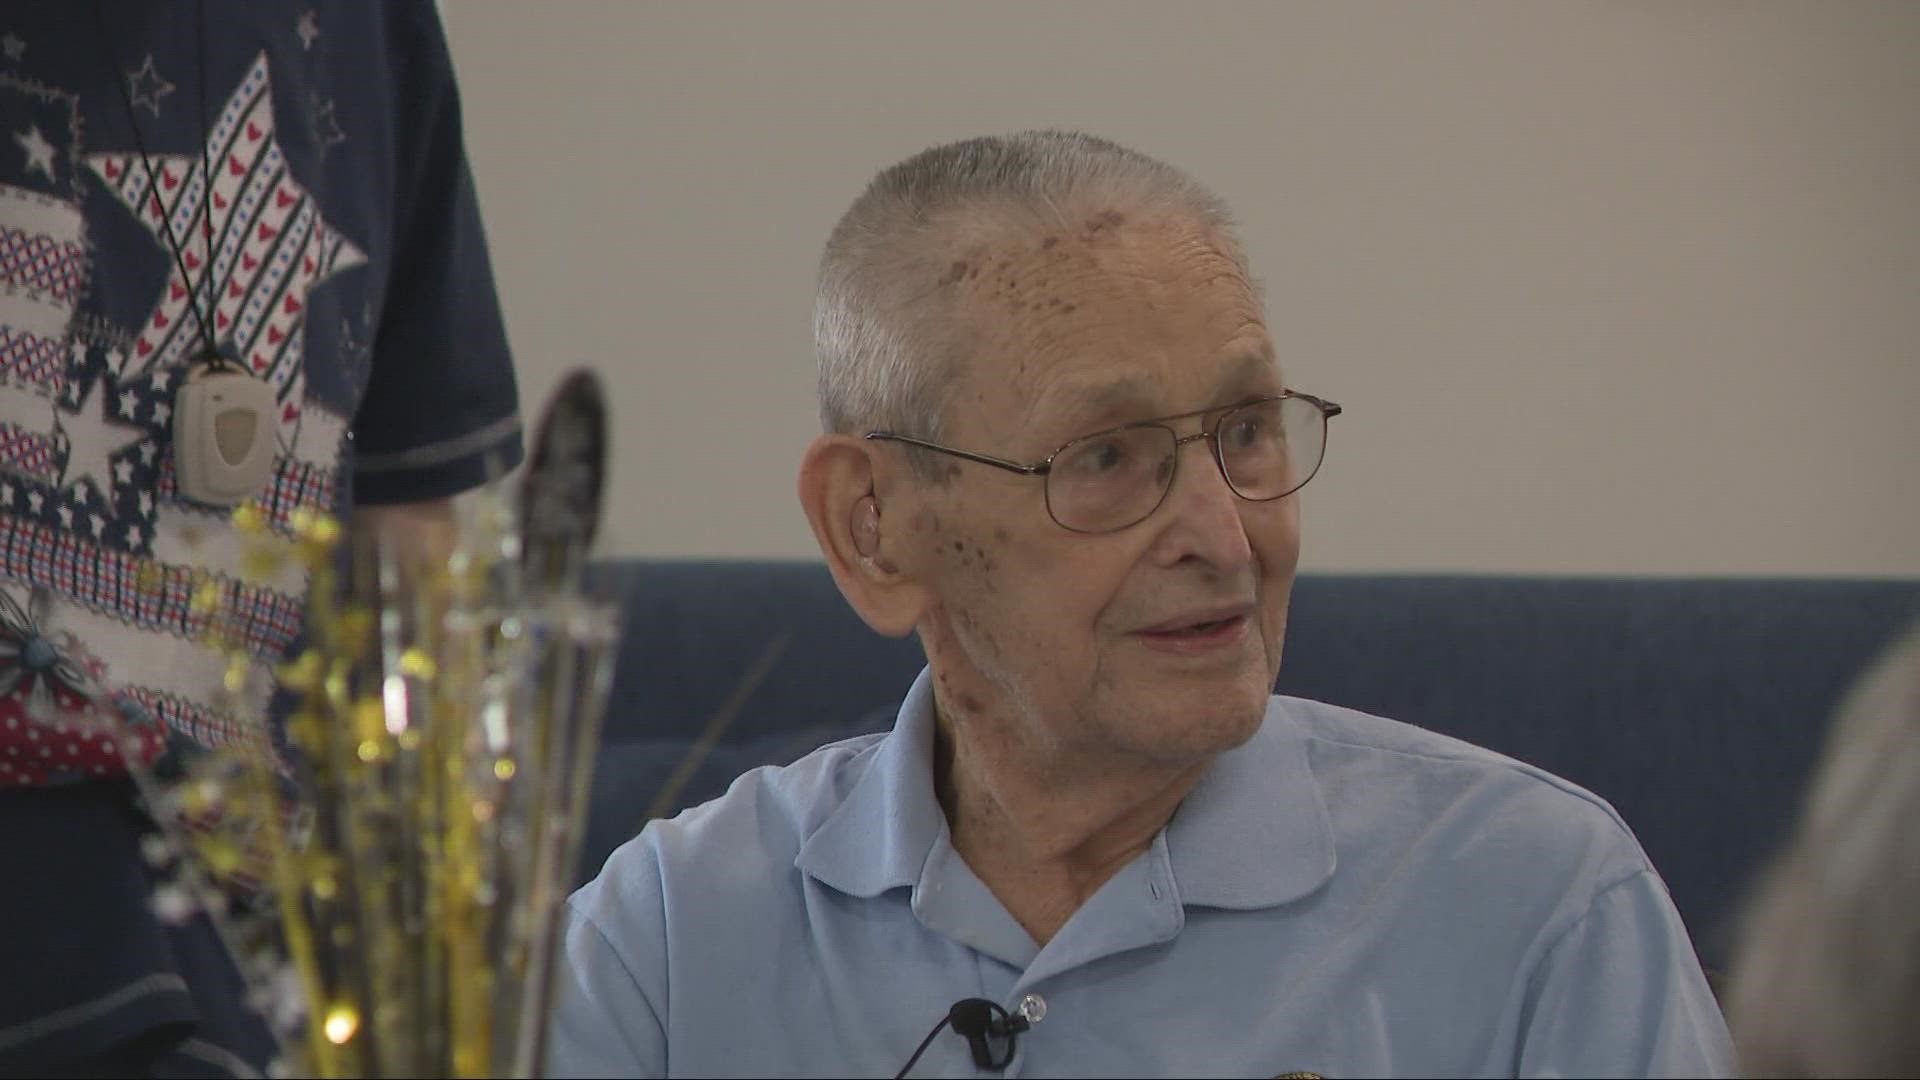 Frank Mekina was 96 when he moved to The Village of St. Edward at Fairlawn in 2013. Today, he's celebrating a huge milestone.